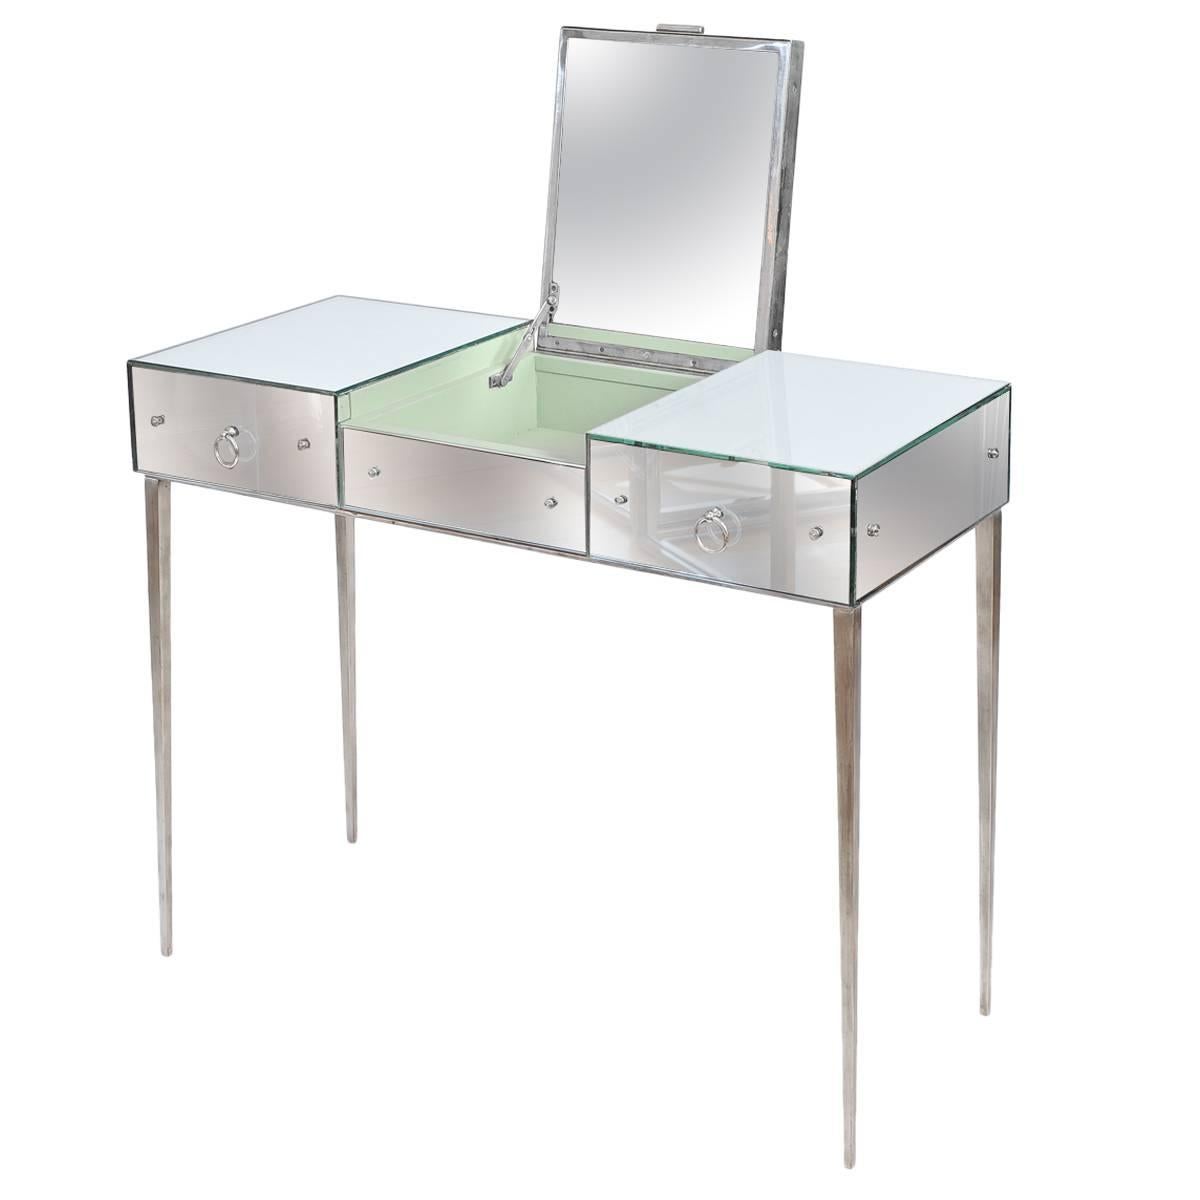 Rare Mirrored Dressing Table by Jean Michel Frank for Comté, 1935–1936